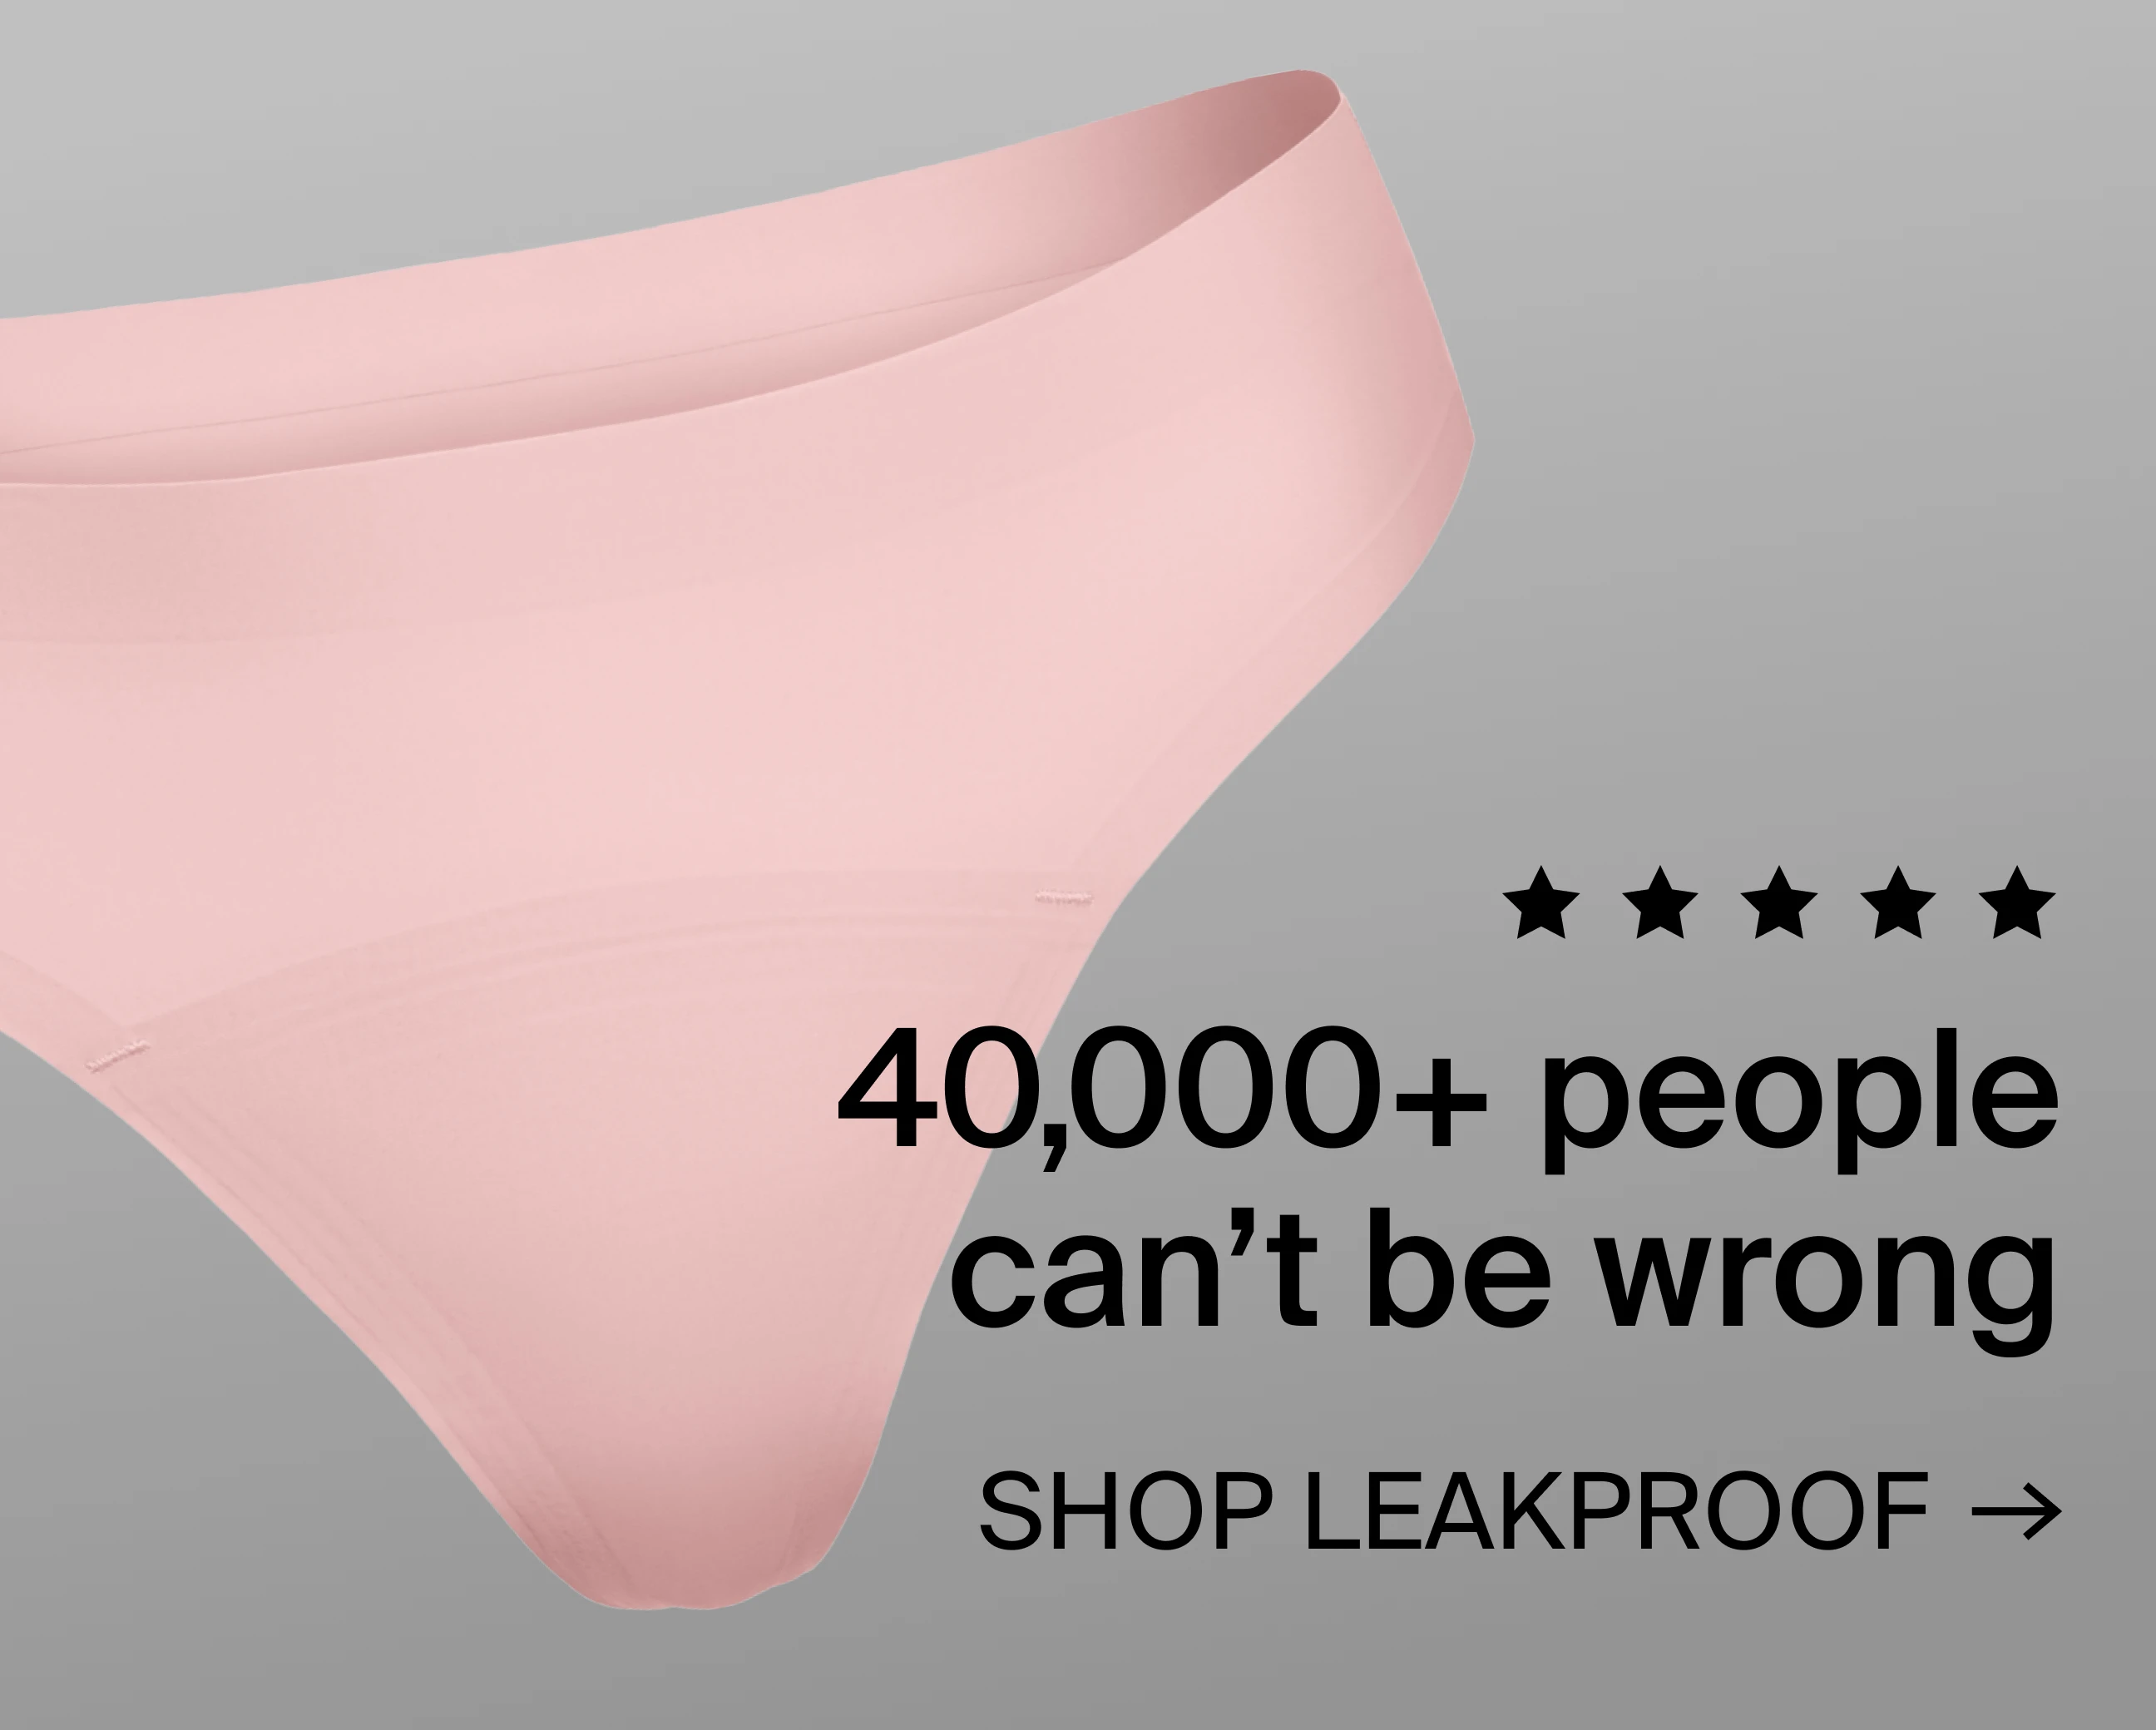 Behave Bras - The reviews are in and they're shocking. Women with